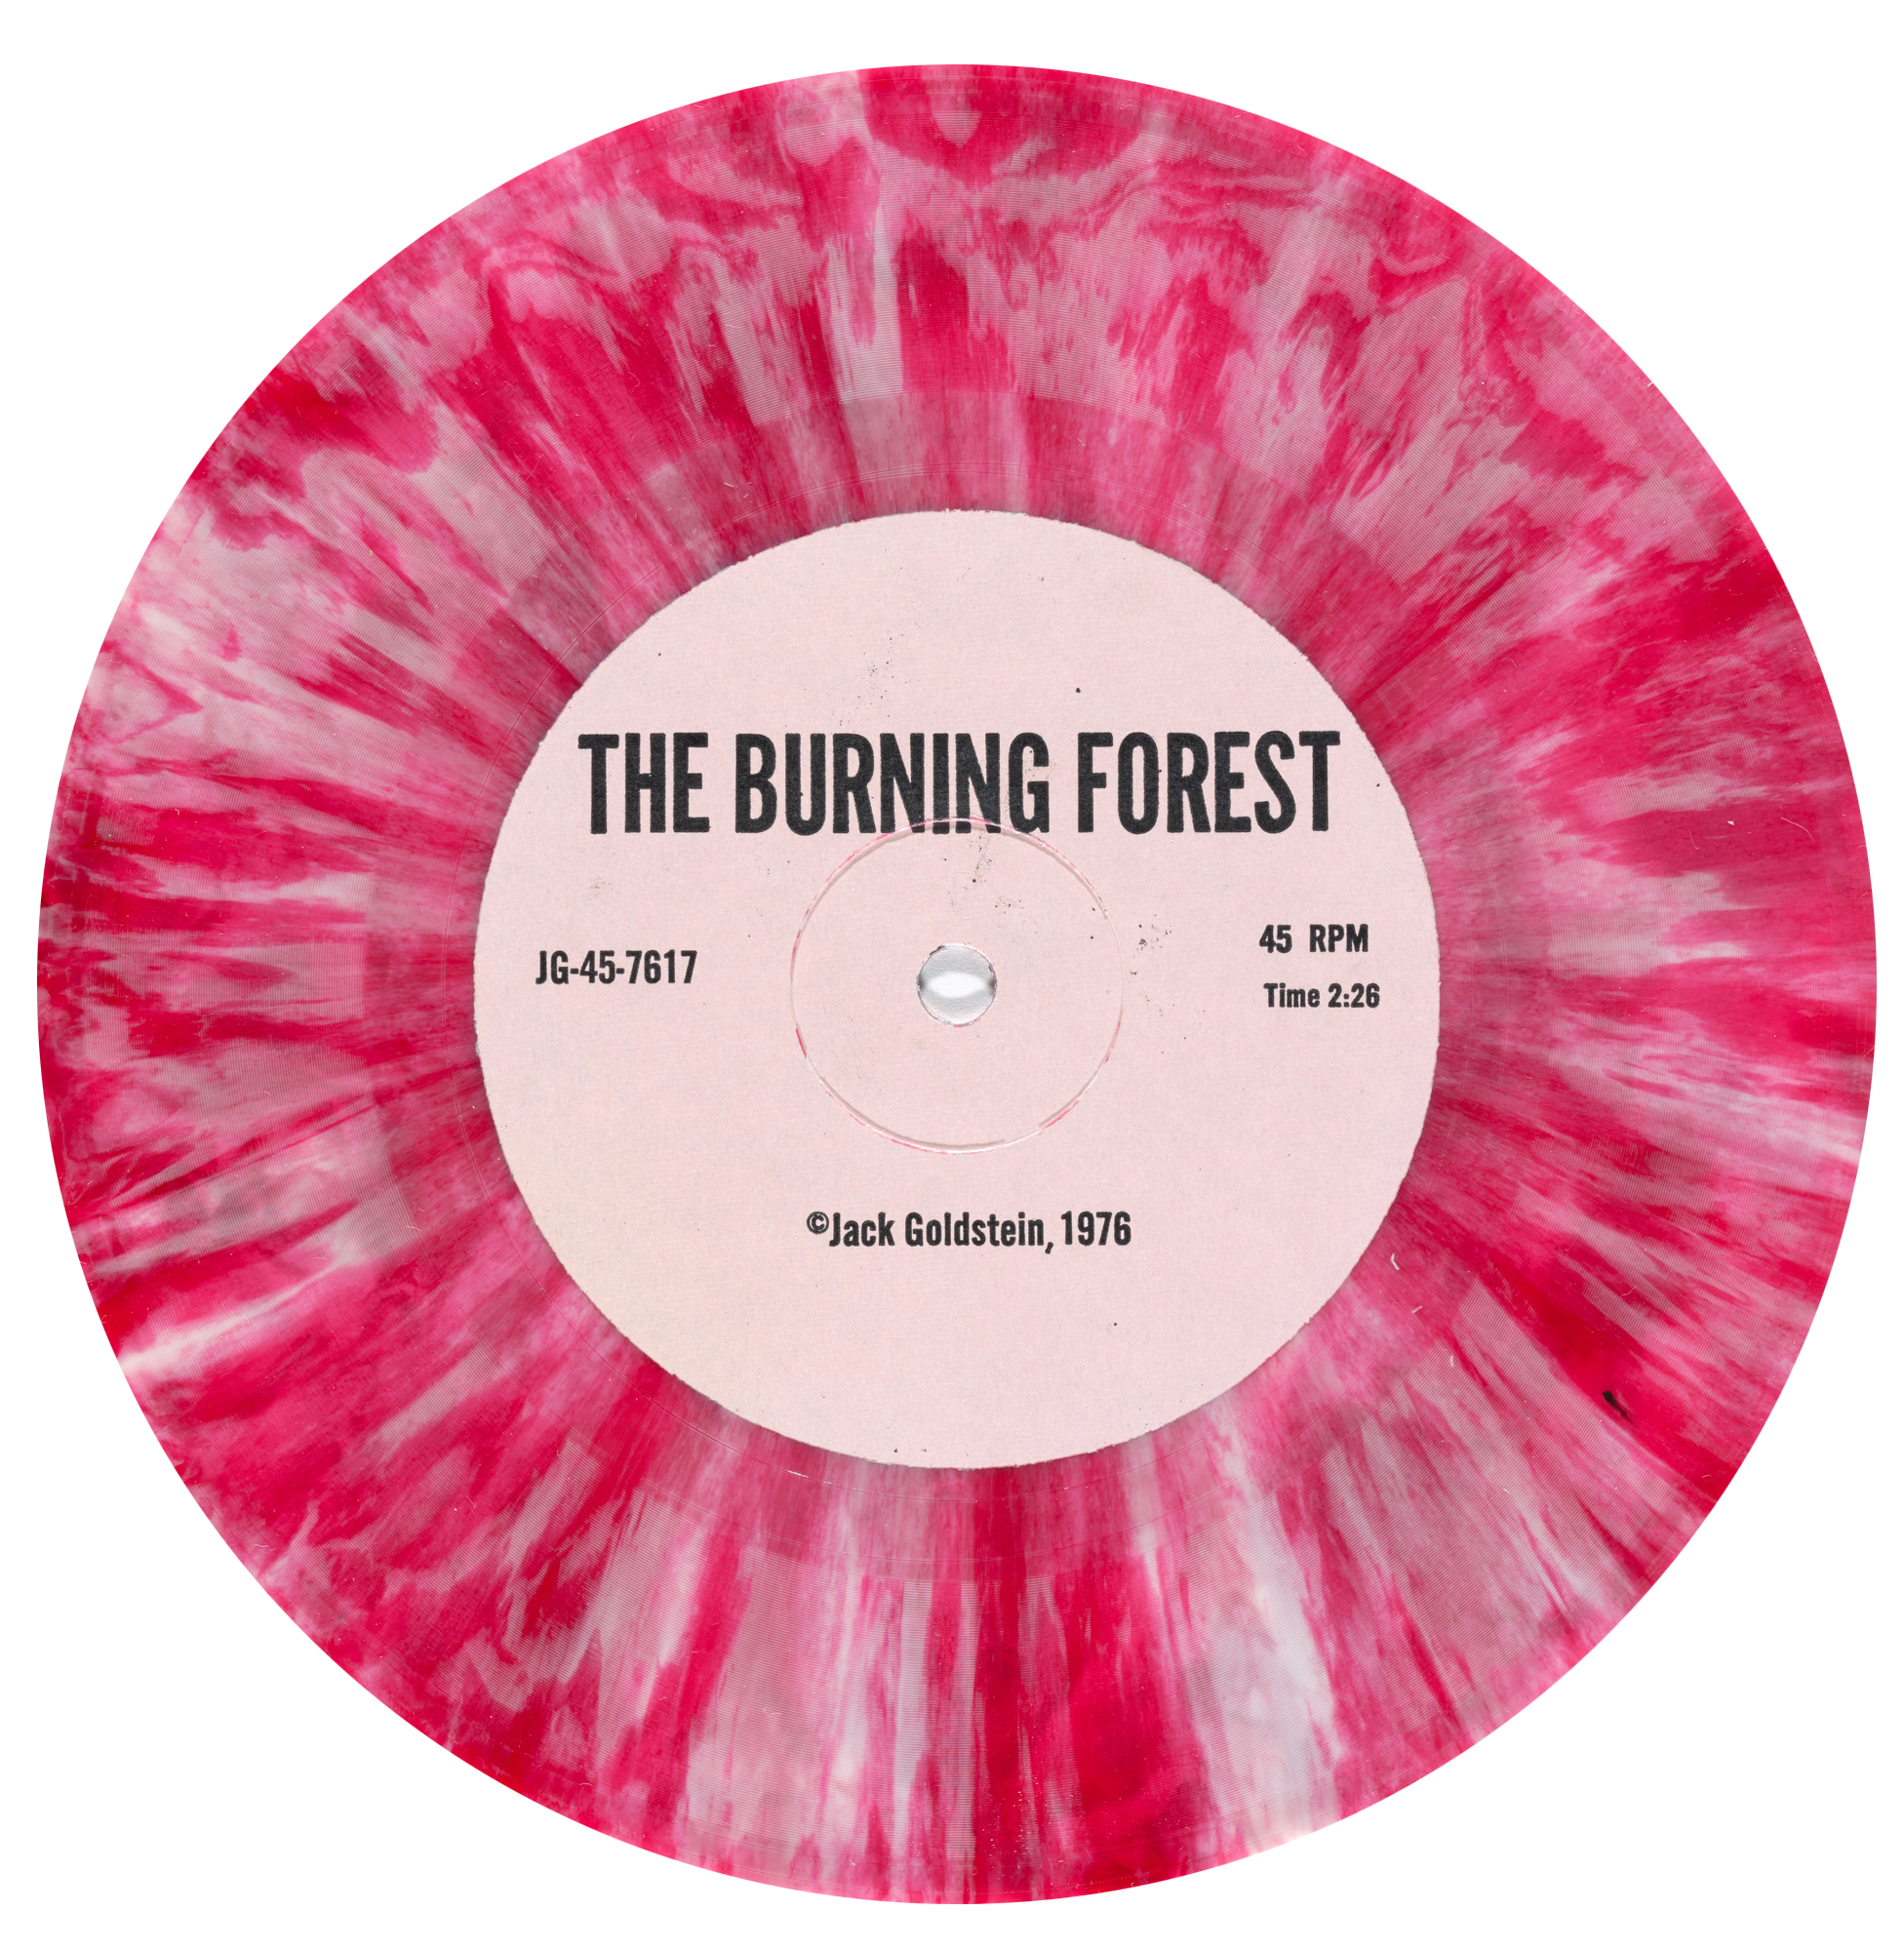  The Burning Forest
Marbled red and white vinyl - 45 rpm 7-inch record

The Burning Forest is one of the nine components of :
A Suite of Nine 45 rpm 7-Inch Records with Sound Effects
1976